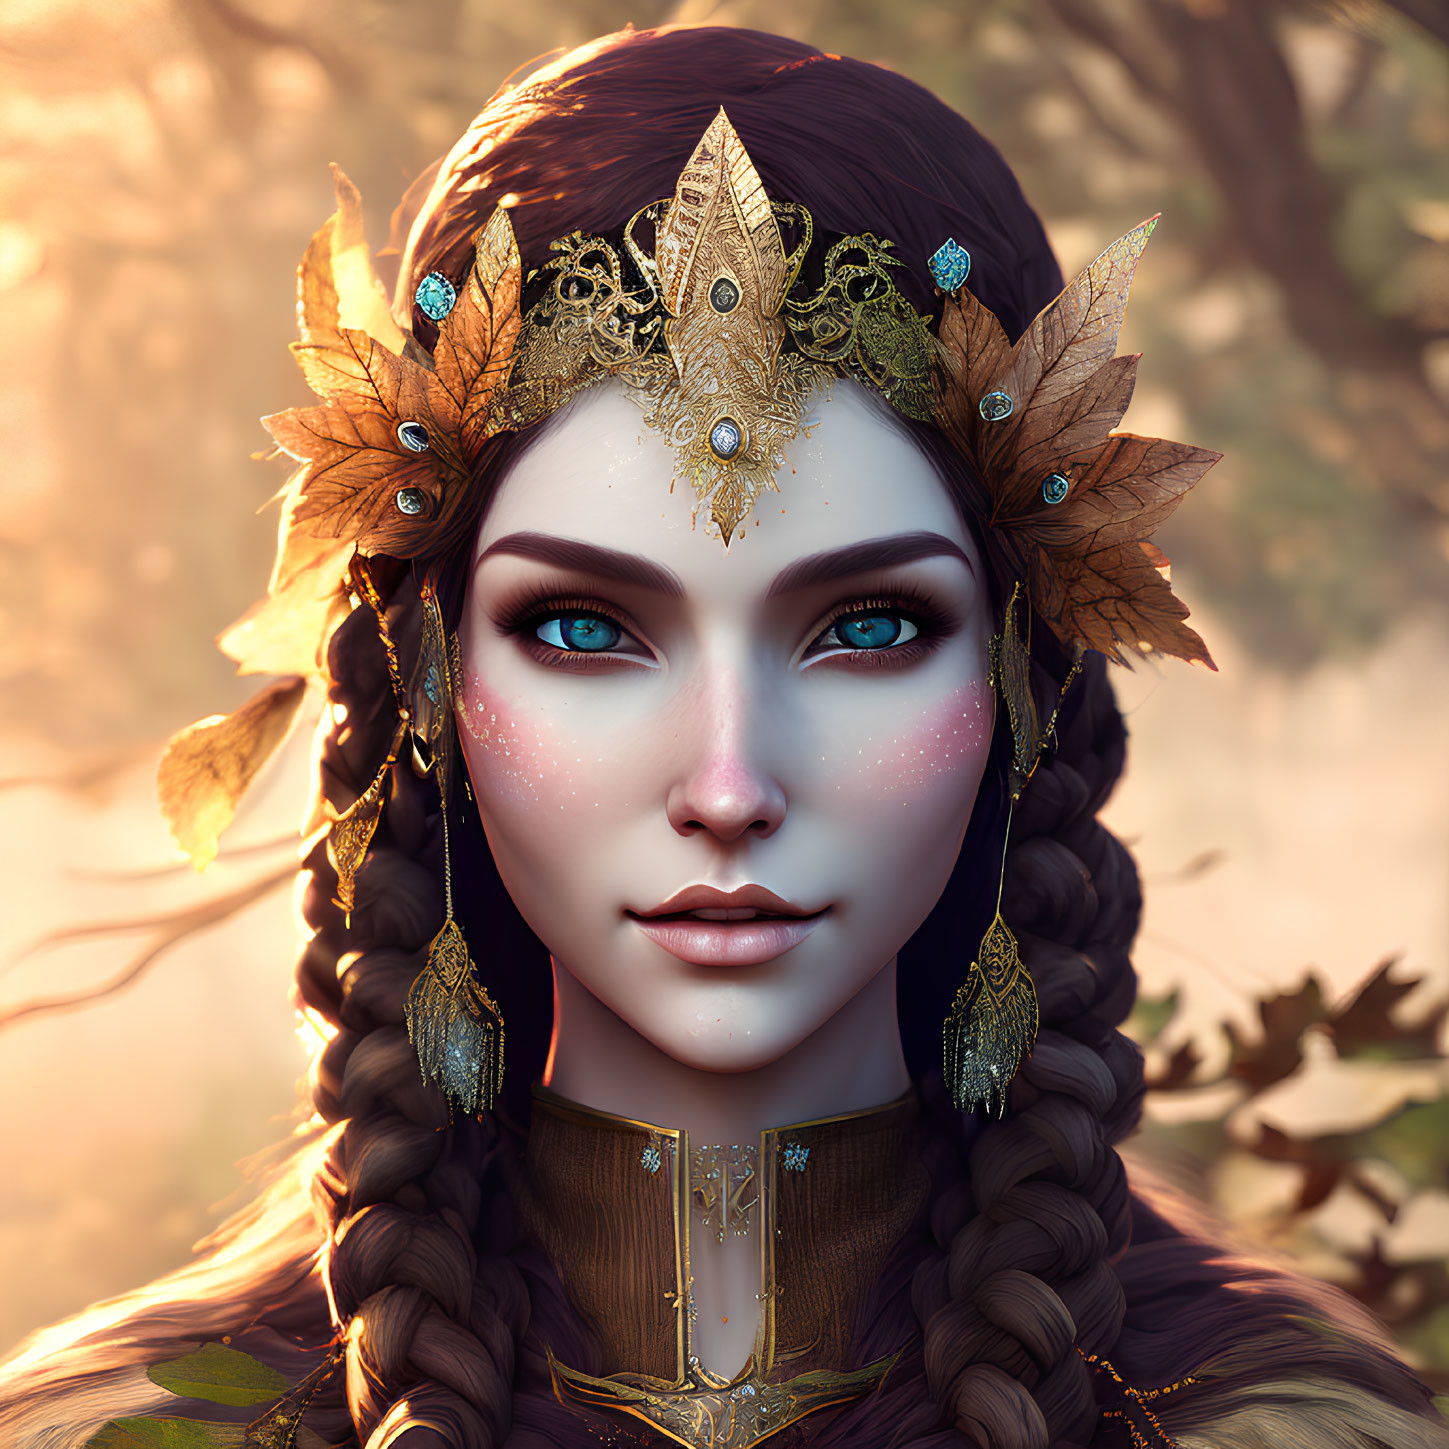 Digital portrait of a woman with braided hair, golden leaf crown, blue eyes, and freck